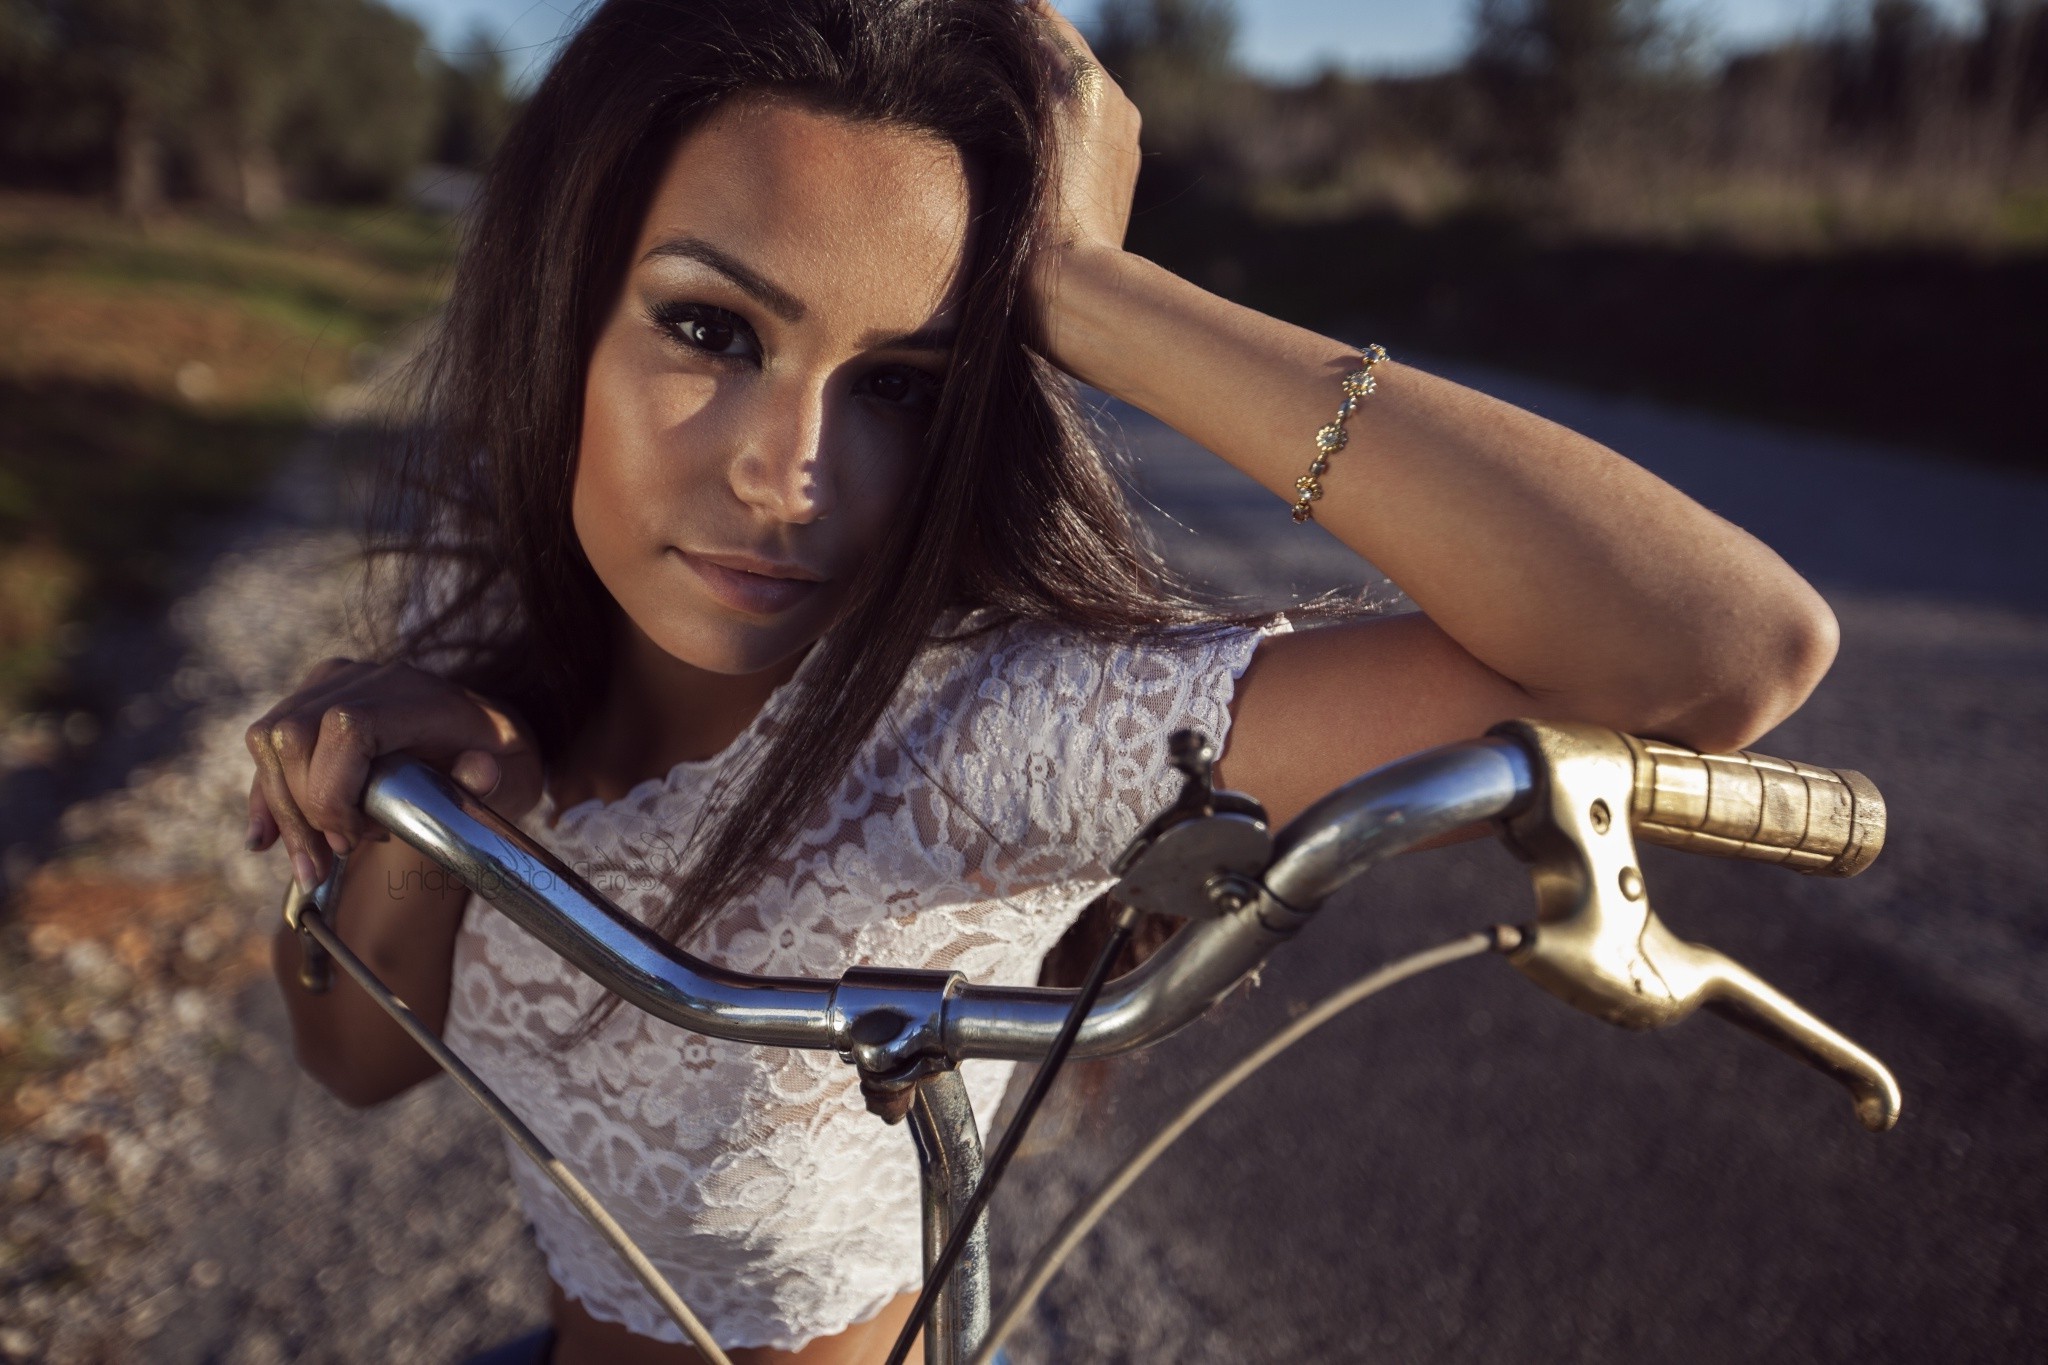 Cláudia Pereira, Women, Face, Portrait, Women With Bikes, Hands On Head, Bicycle Wallpaper